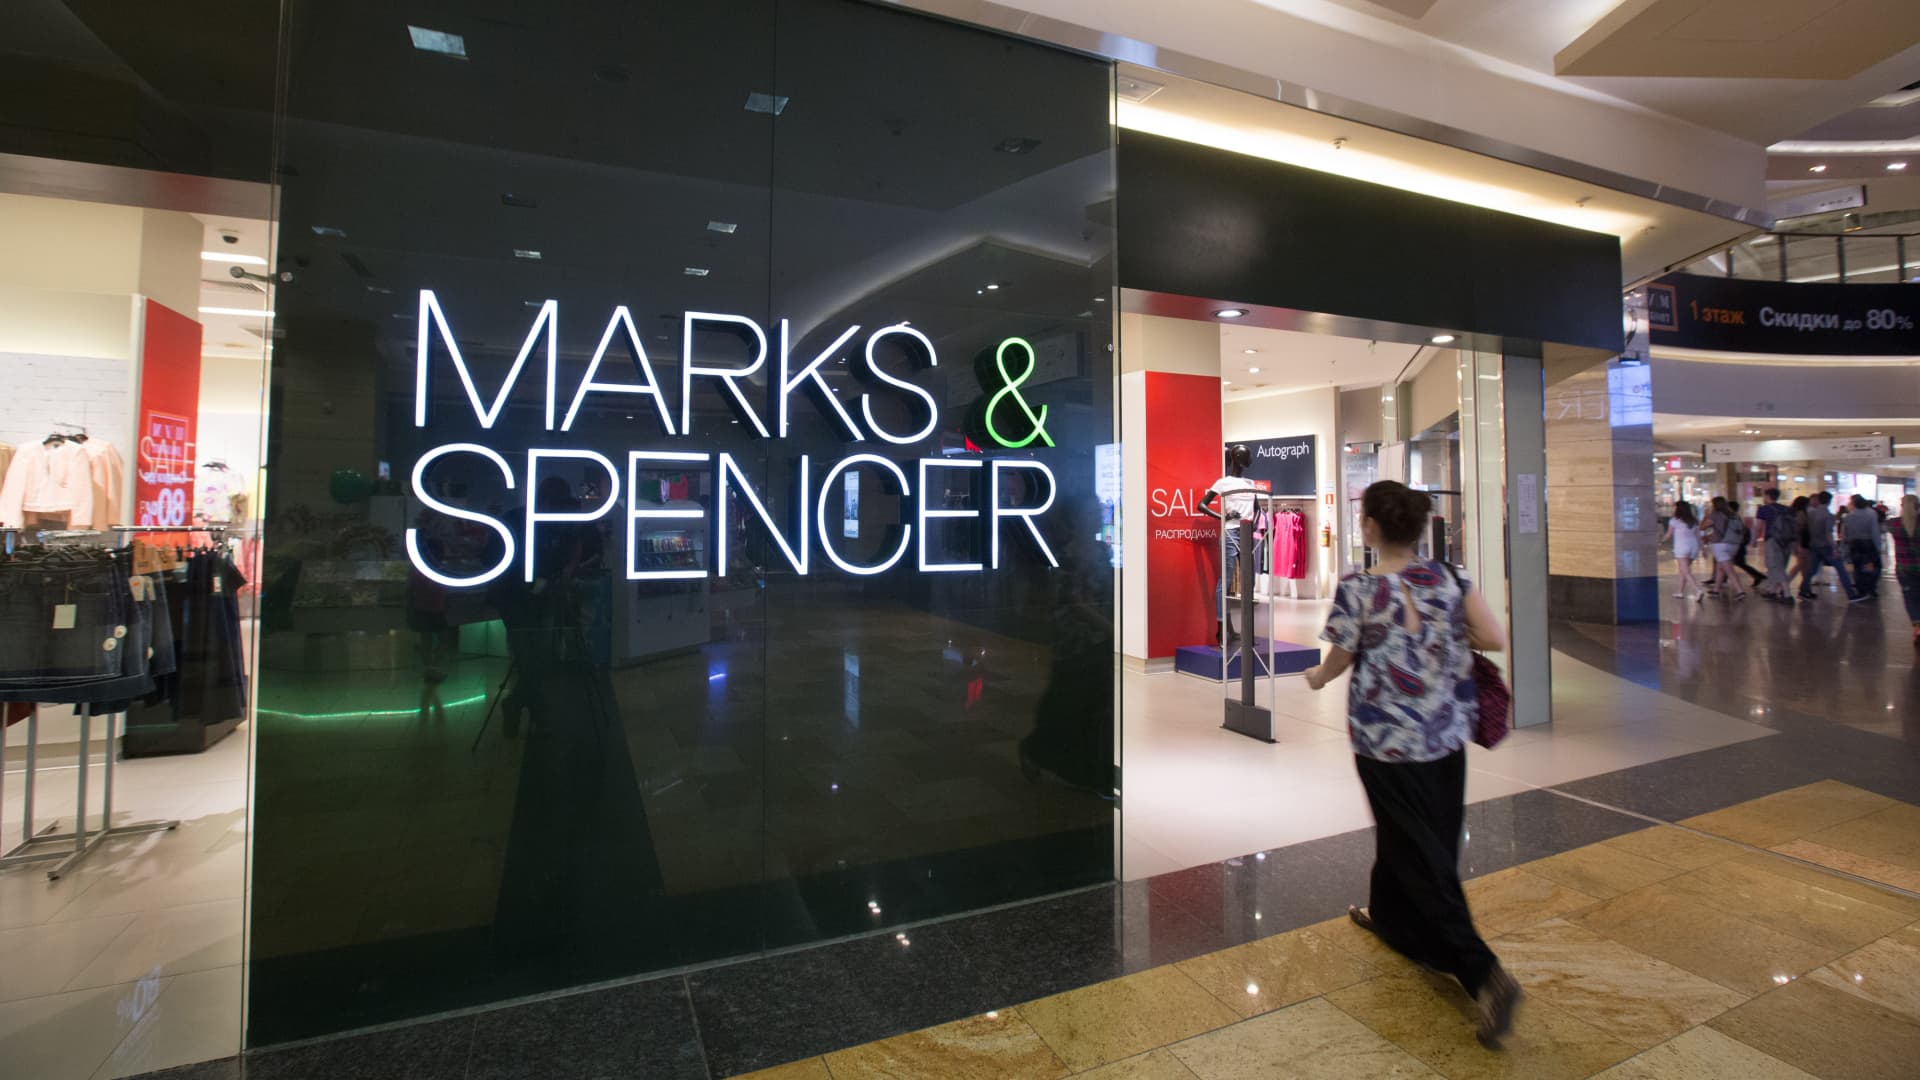 A customer enters a Marks & Spencer Group Plc store in the Afimall retail and entertainment center at the Moscow International Business Center in Moscow, Russia, on Saturday, Aug. 8, 2015.